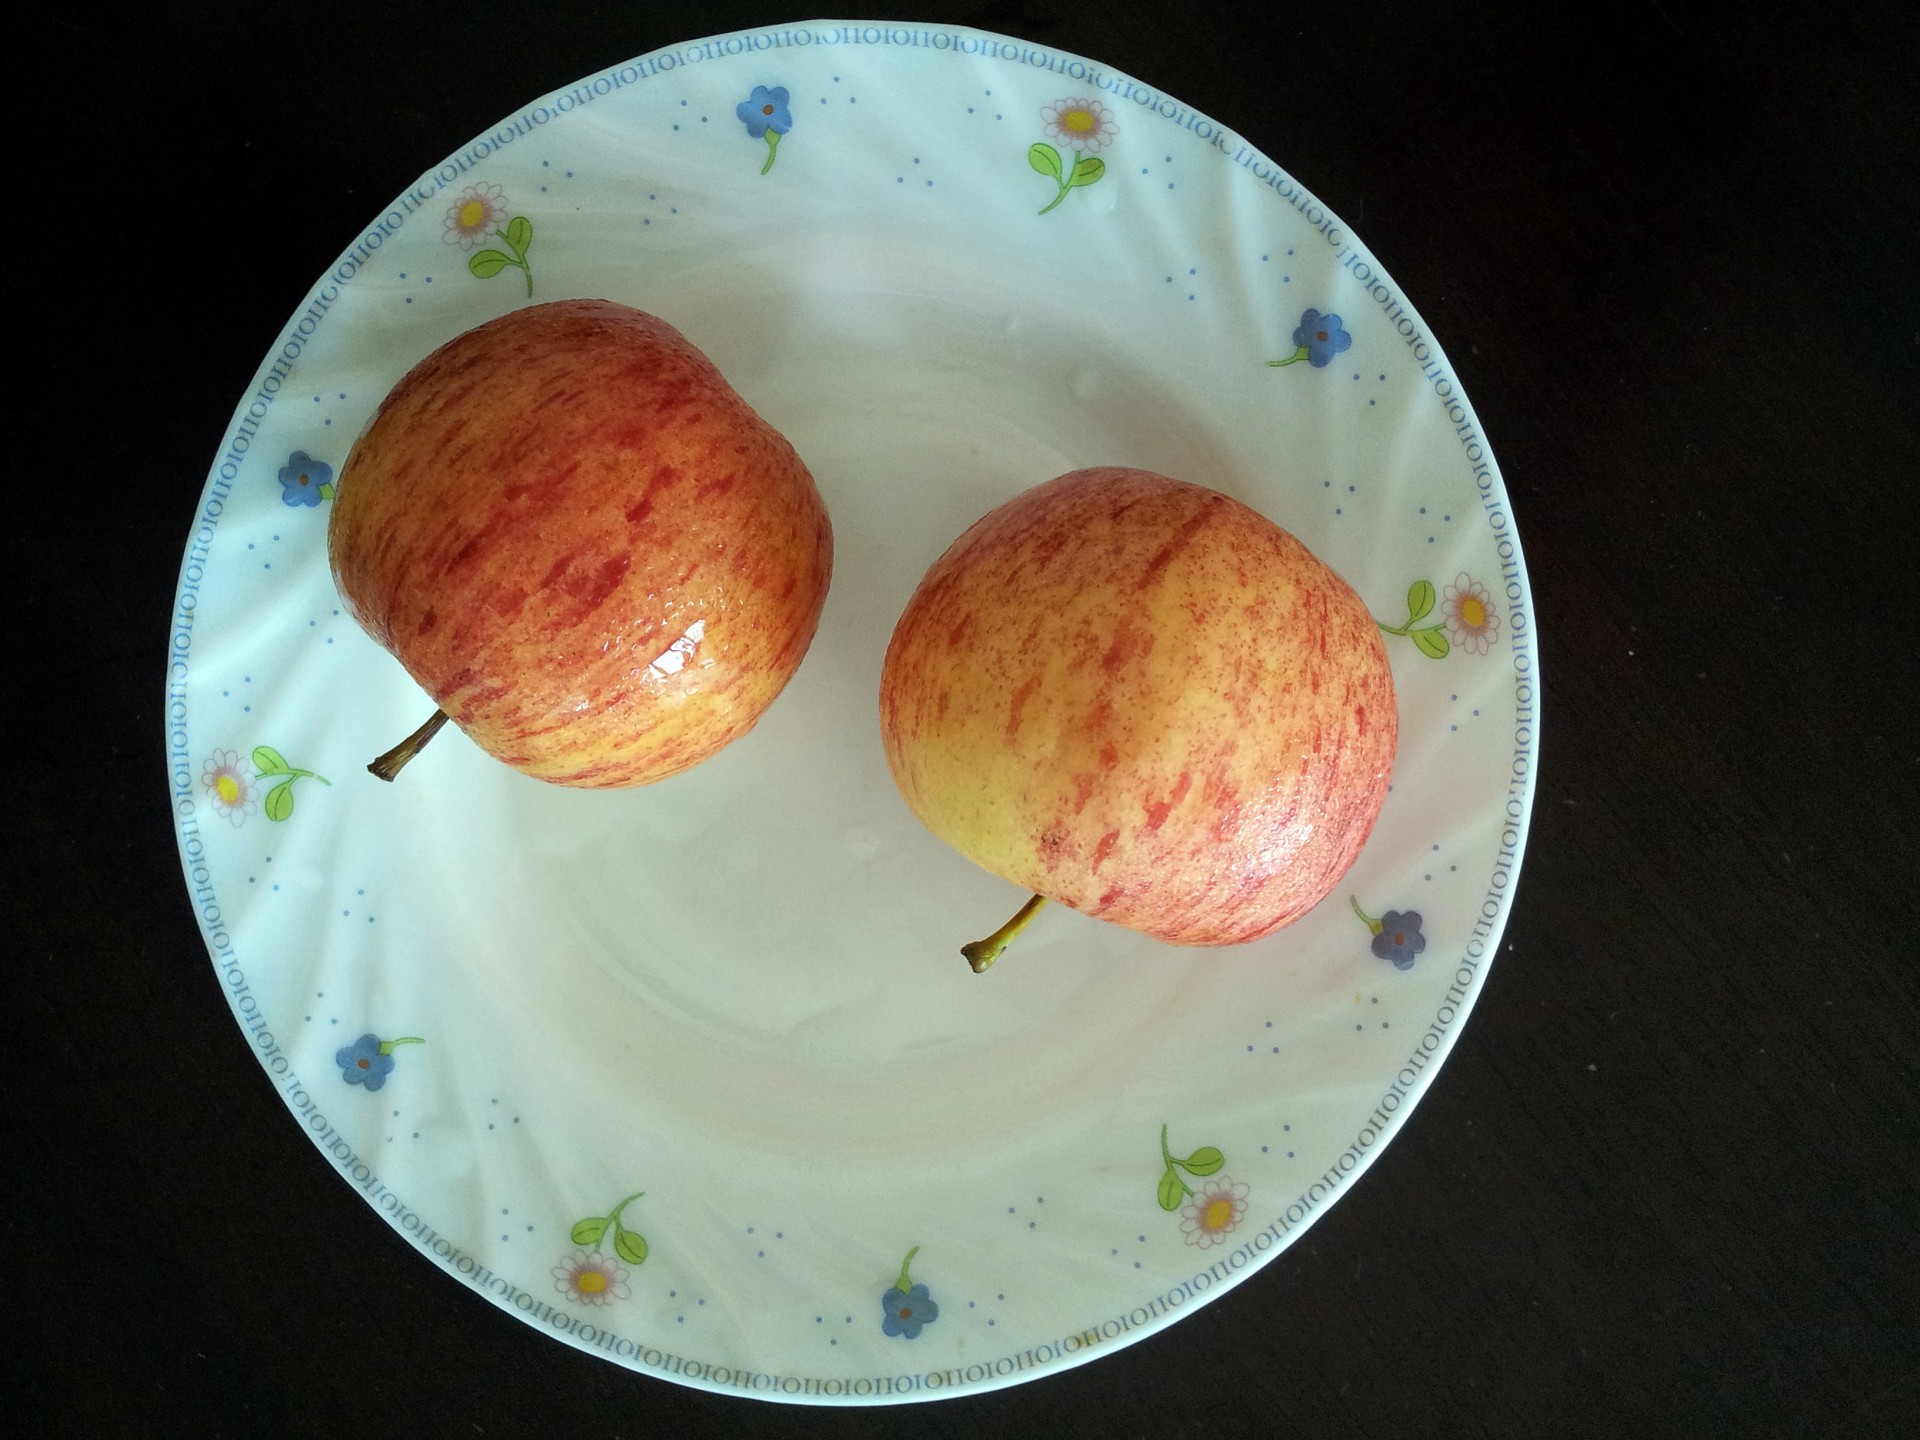 2 Apples On The Plate